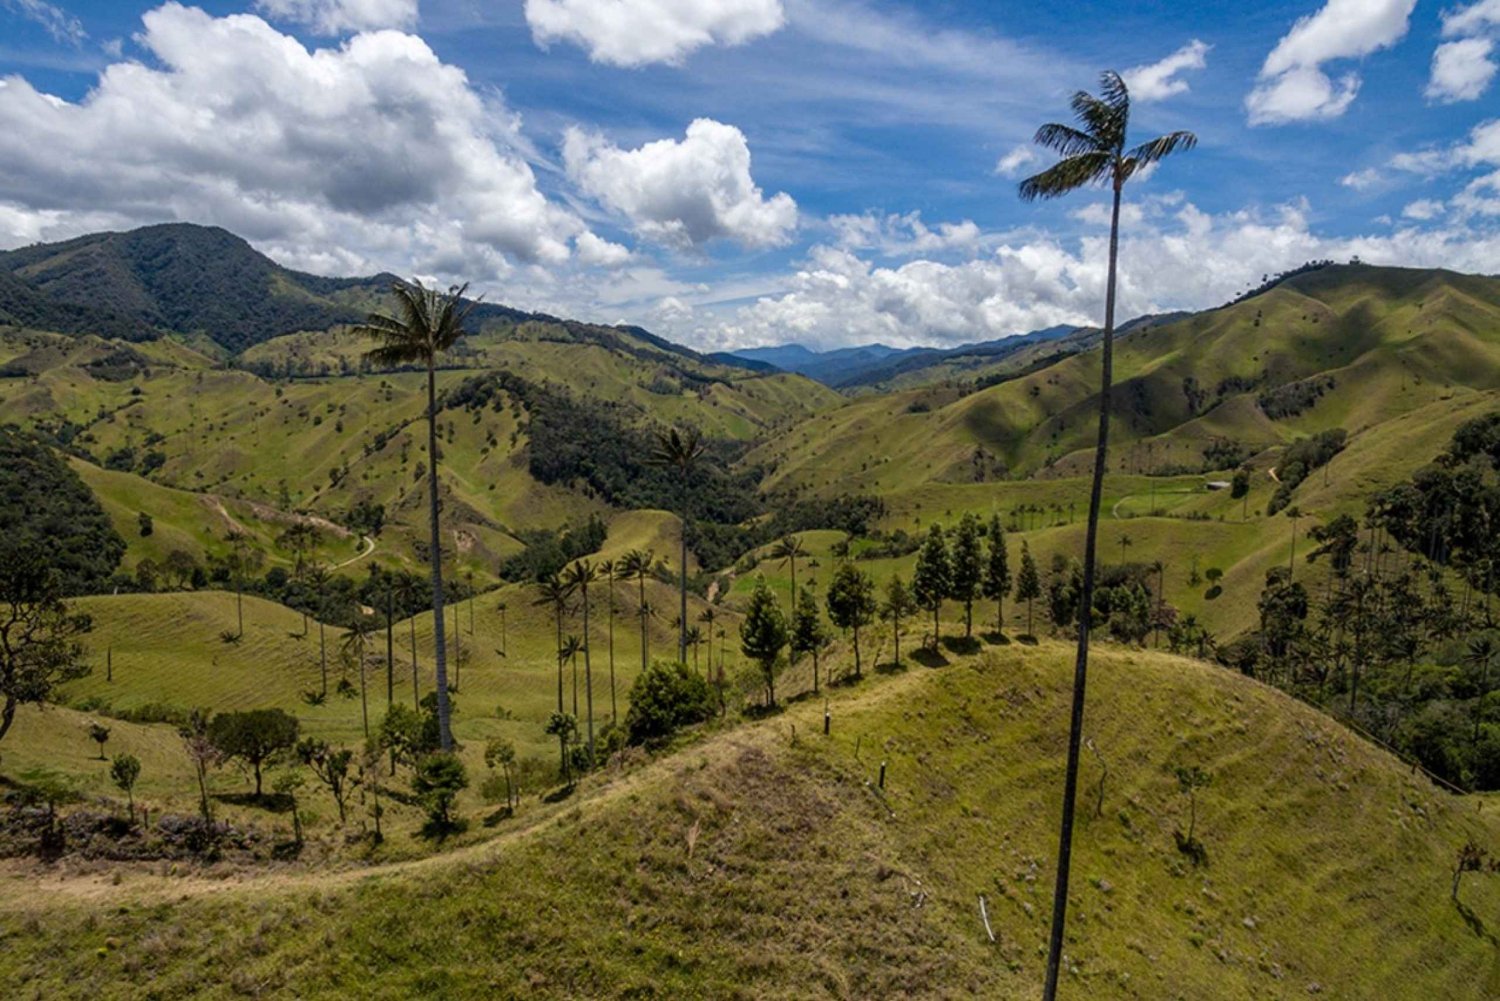 From Pereira/Salento: Guided Trek in the Cocora Valley